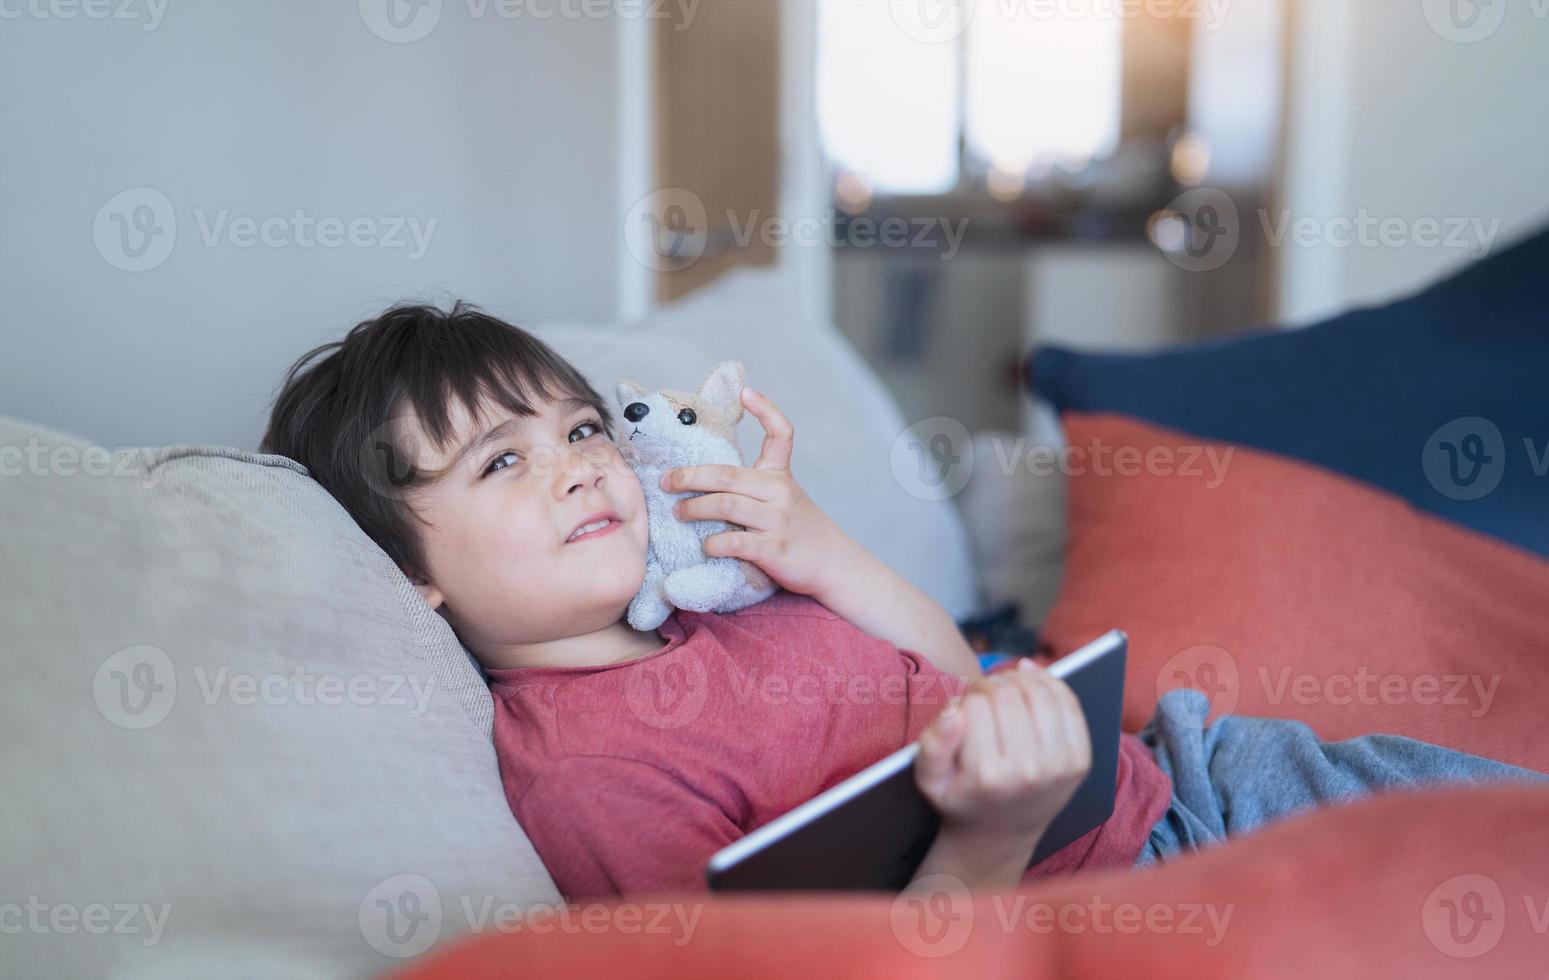 Happy Kid sitting on sofa playing with dog toy and watching cartoons or playing games on tablet, Child boy relaxing after learning online on internet,Home schooling or Online education concept photo